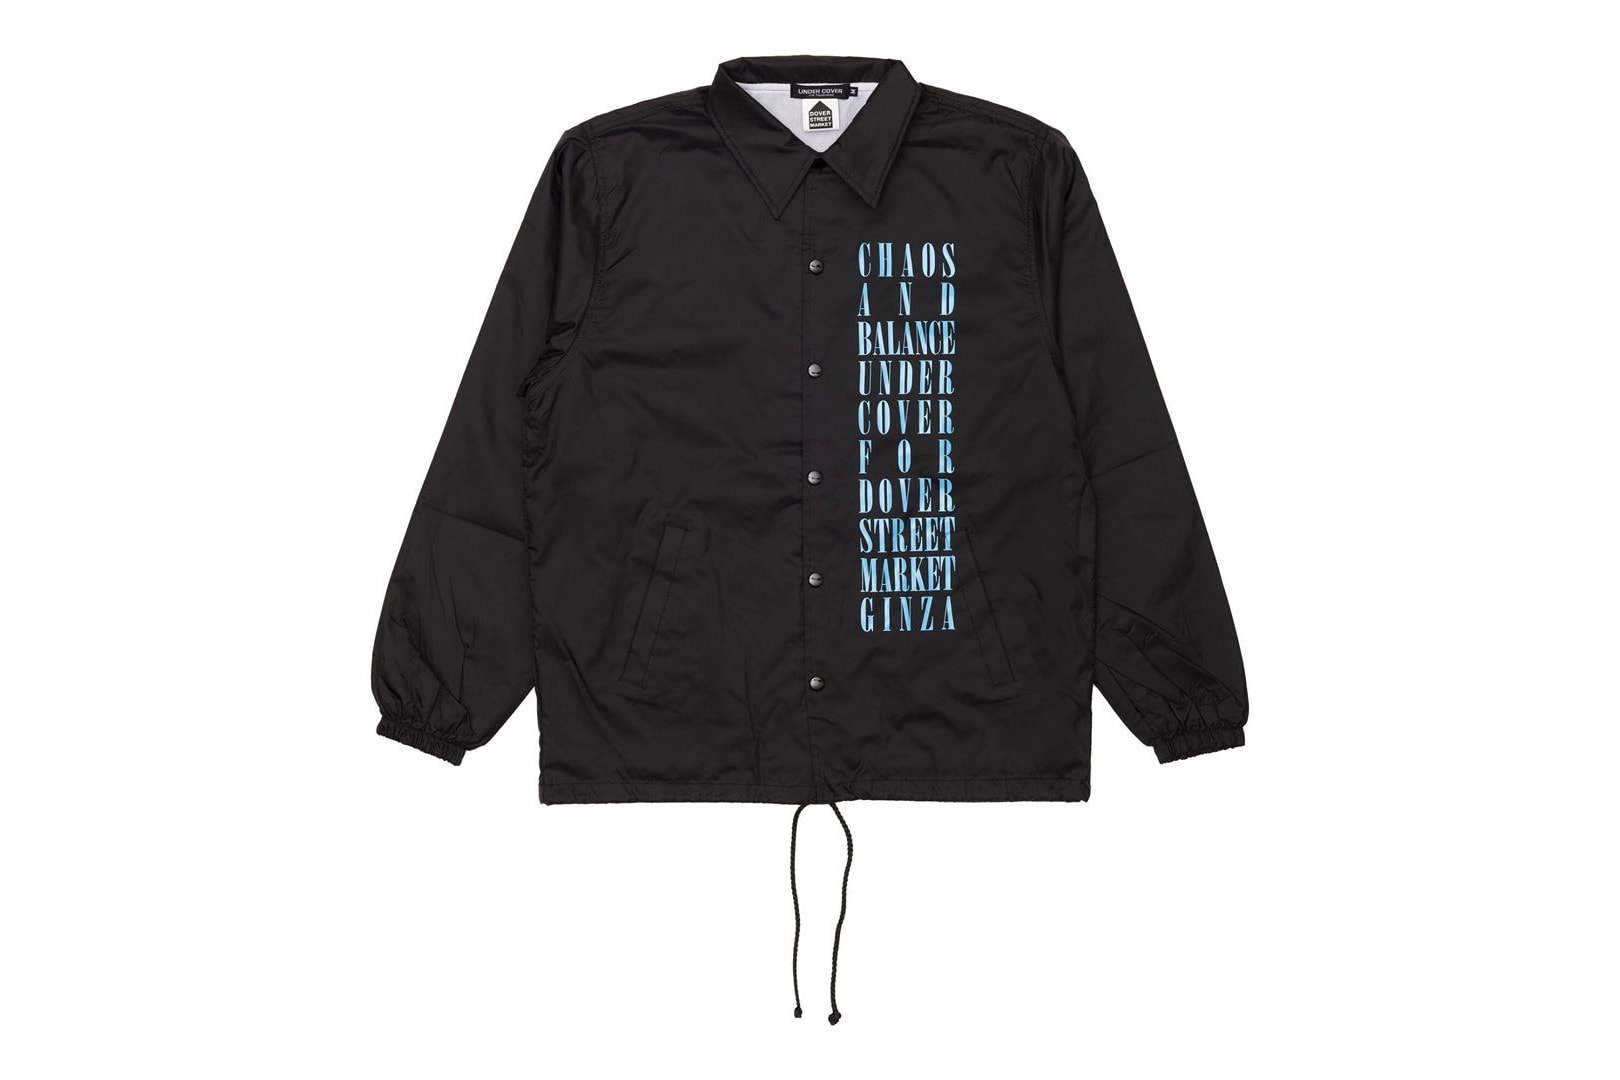 UNDERCOVER Dover Street Market Ginza 5th Anniversary Chaos and Balance Rose Jacket Front